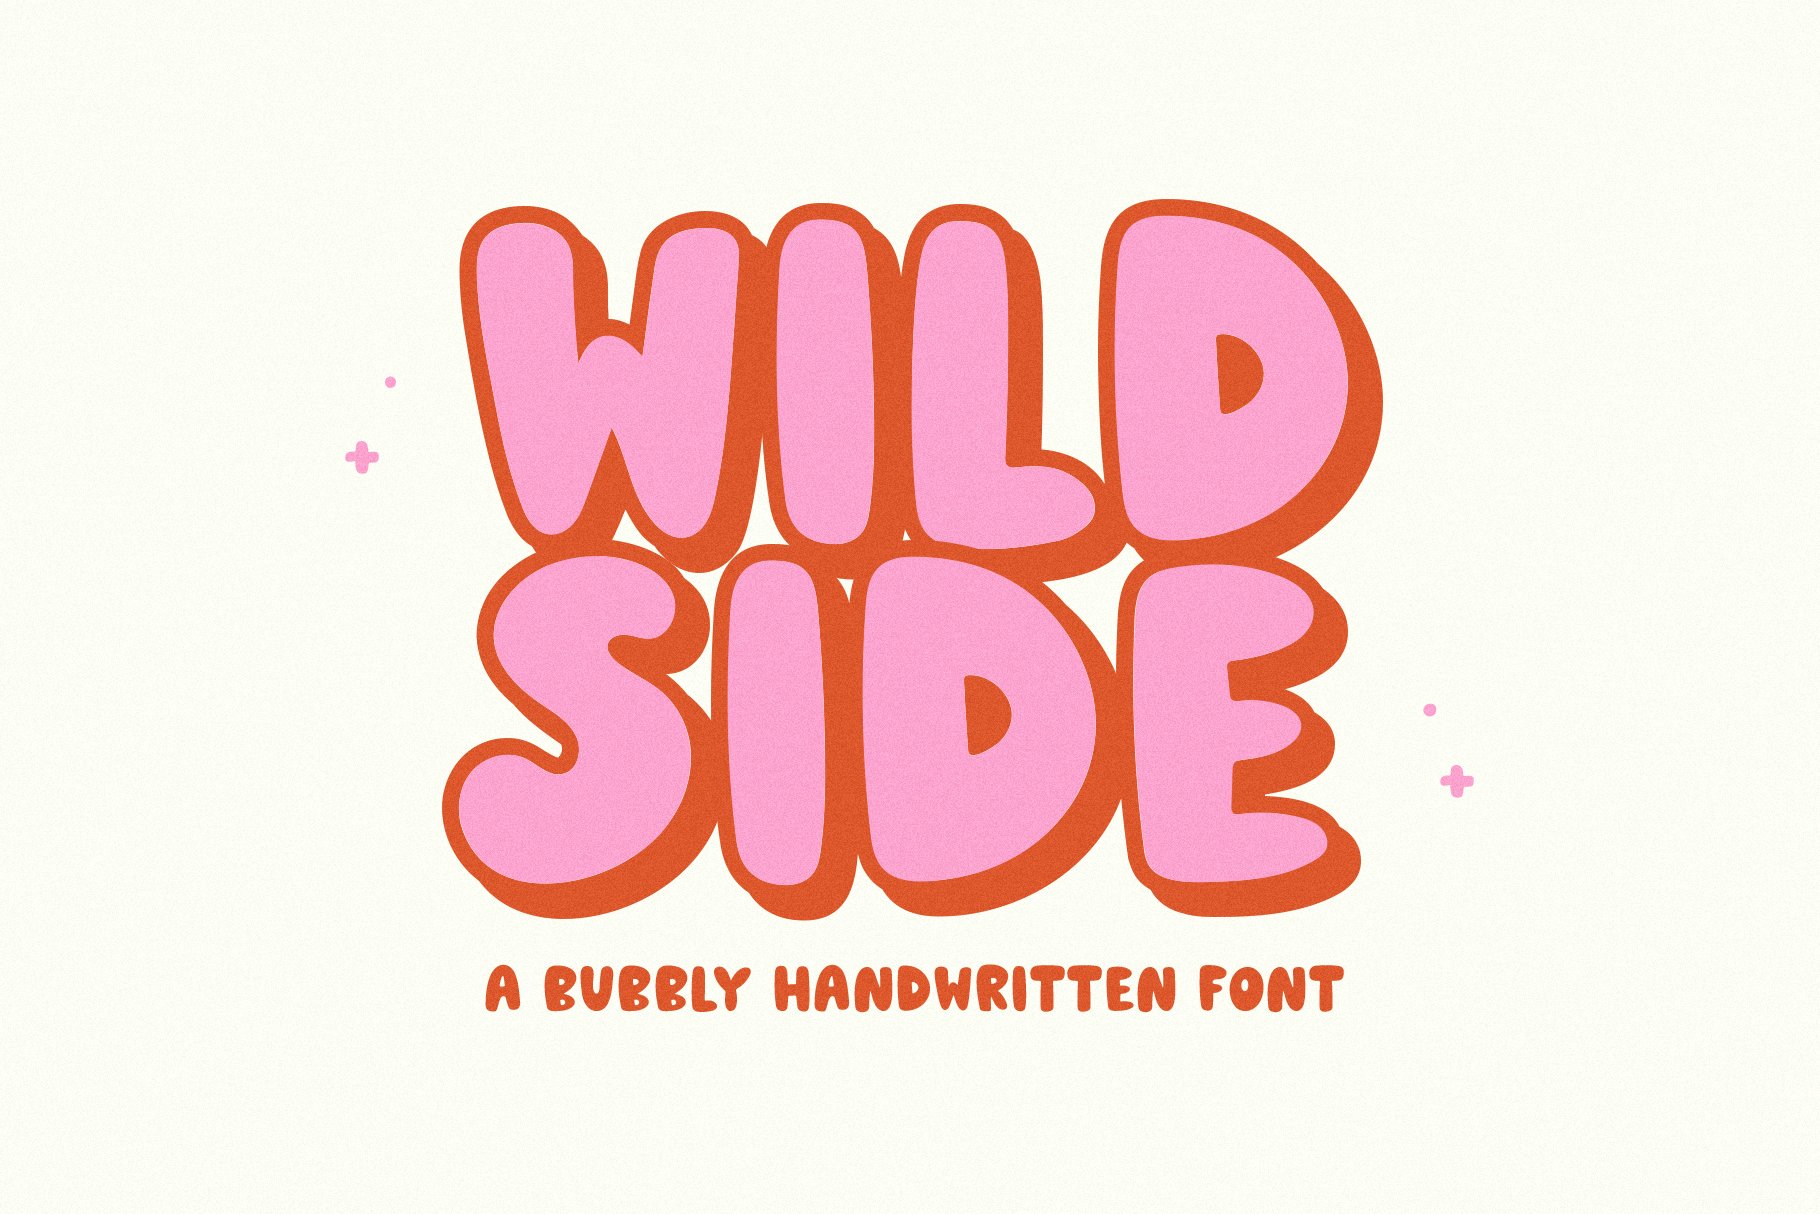 Wildside | Bubbly Handwritten Font cover image.